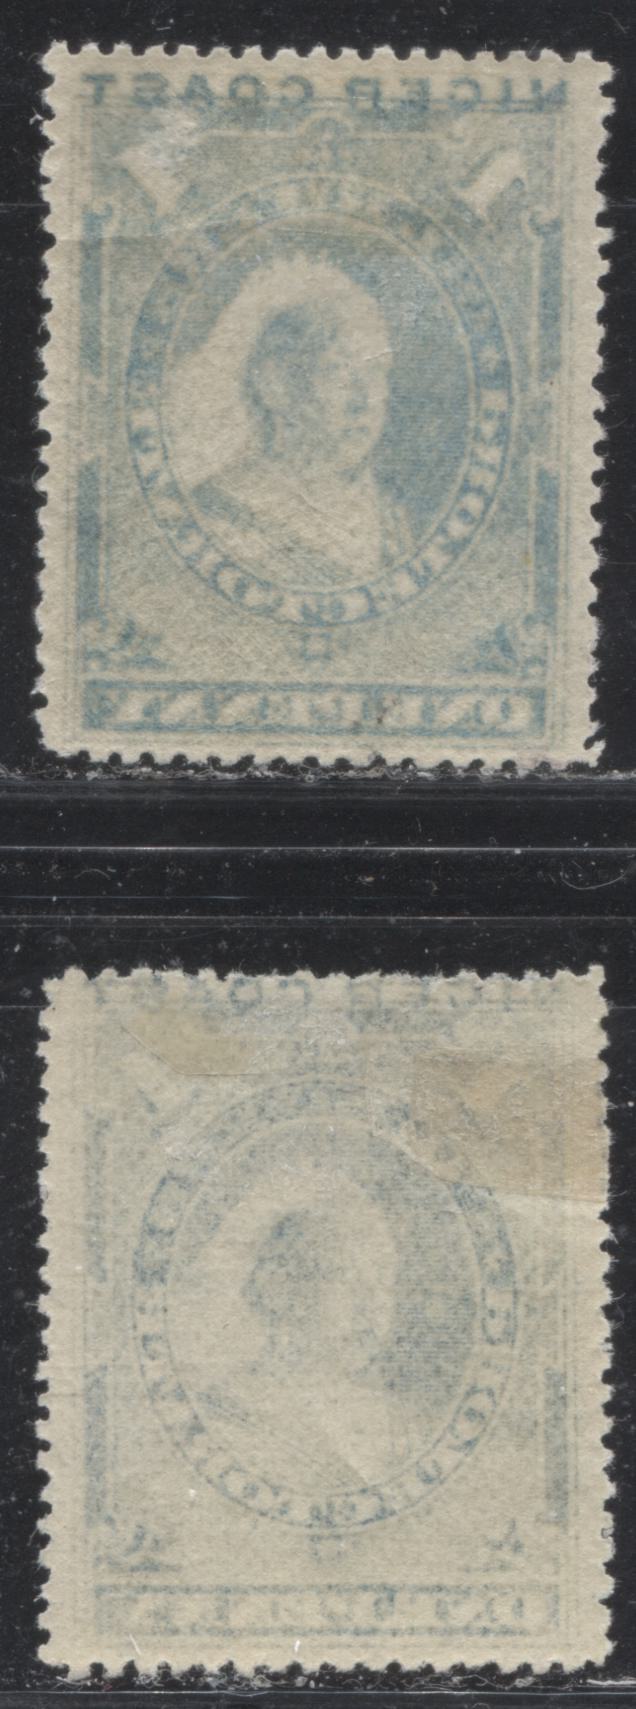 Lot 187 Niger Coast Protectorate SG#46, 46b 1d Deep Dull Blue and Dull Blue Queen Victoria 1894 Obliterated "Oil Rivers" Waterlow Issue, Two VFOG Examples, Perf. 14.5-15, 39,400 Issued, SG Cat. 13.5 GBP = Approximately $22.95 For Fine OG, Est. $15